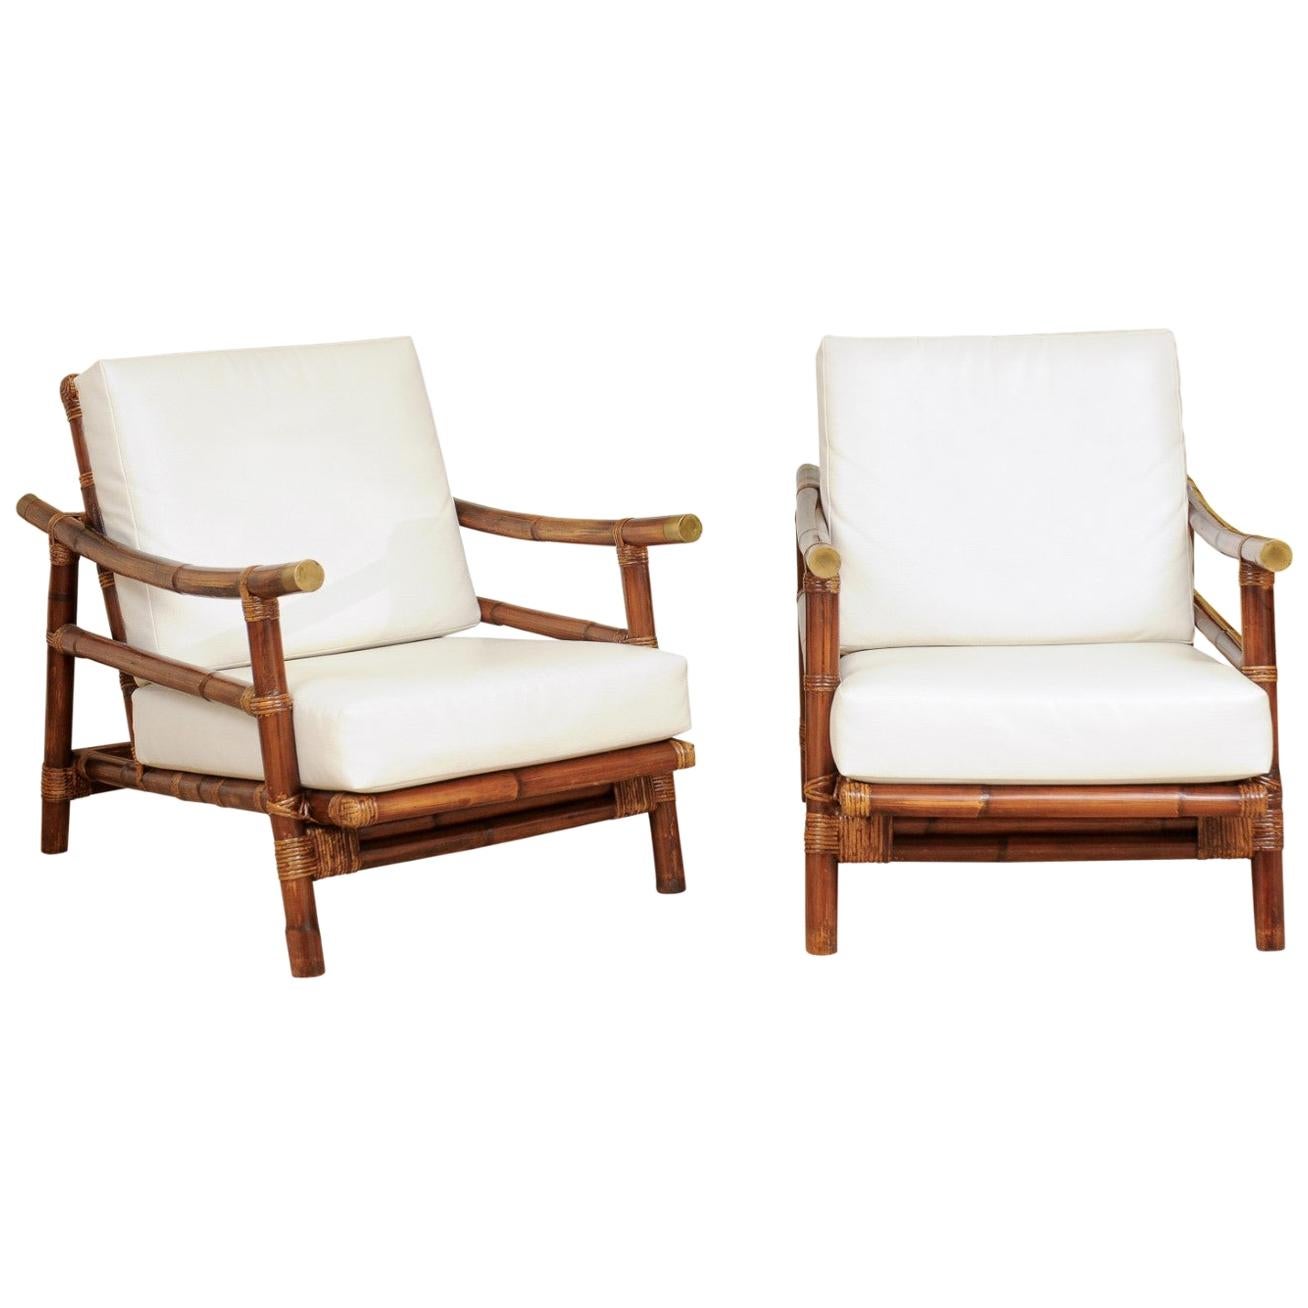 Stellar Restored Pair of Rattan Campaign Loungers, circa 1960 For Sale